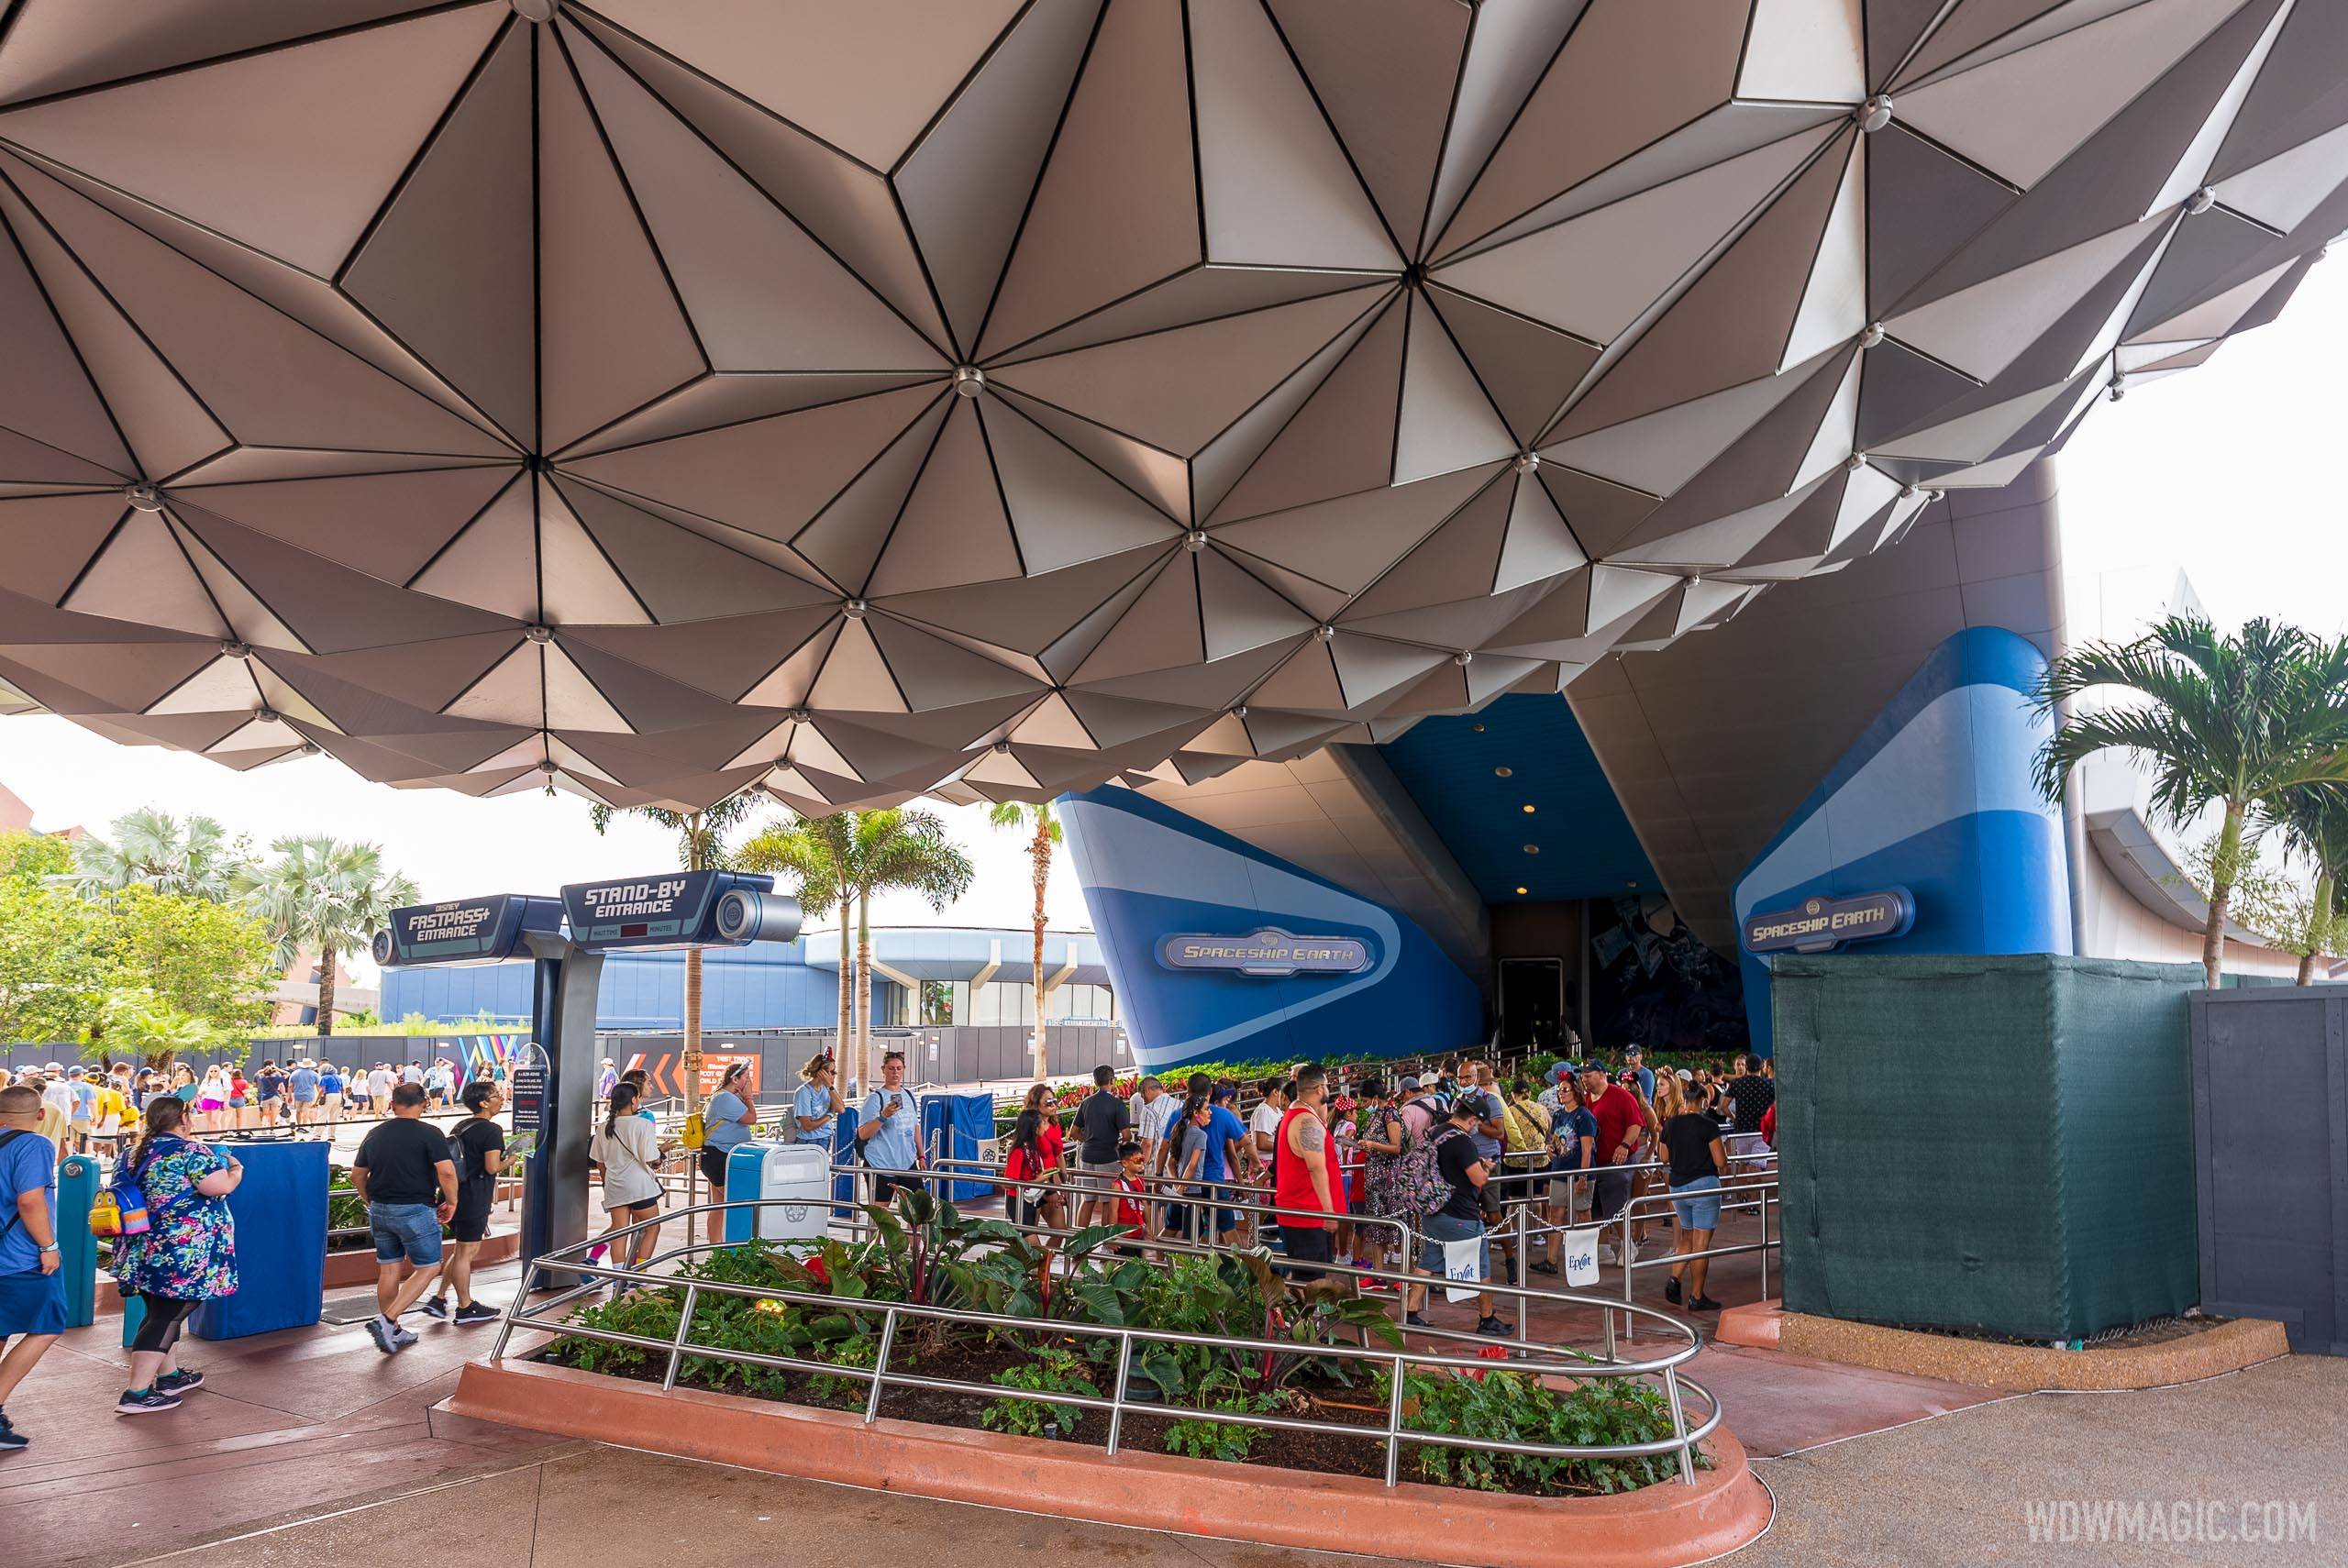 Guests are allowed to queue up at Spaceship Earth as soon as they enter the park from 10am, however the ride doesn't open until 11am